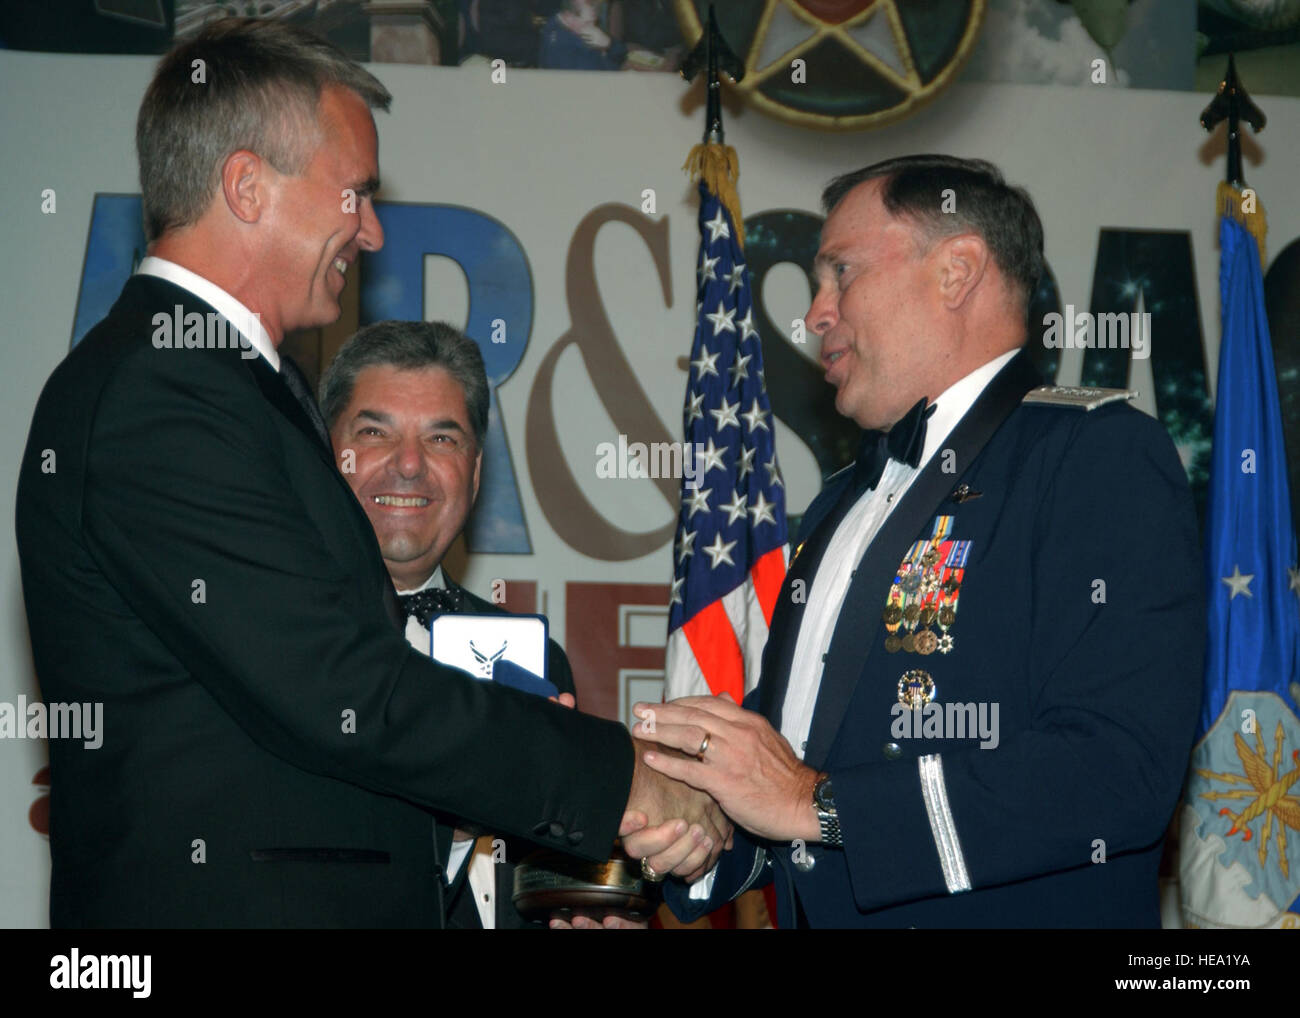 WASHINGTON -- Air Force Chief of Staff Gen. John P. Jumper recognizes  Richard Dean Anderson for his role in the "Stargate SG-1" television series  and for the show's continuous positive depiction of